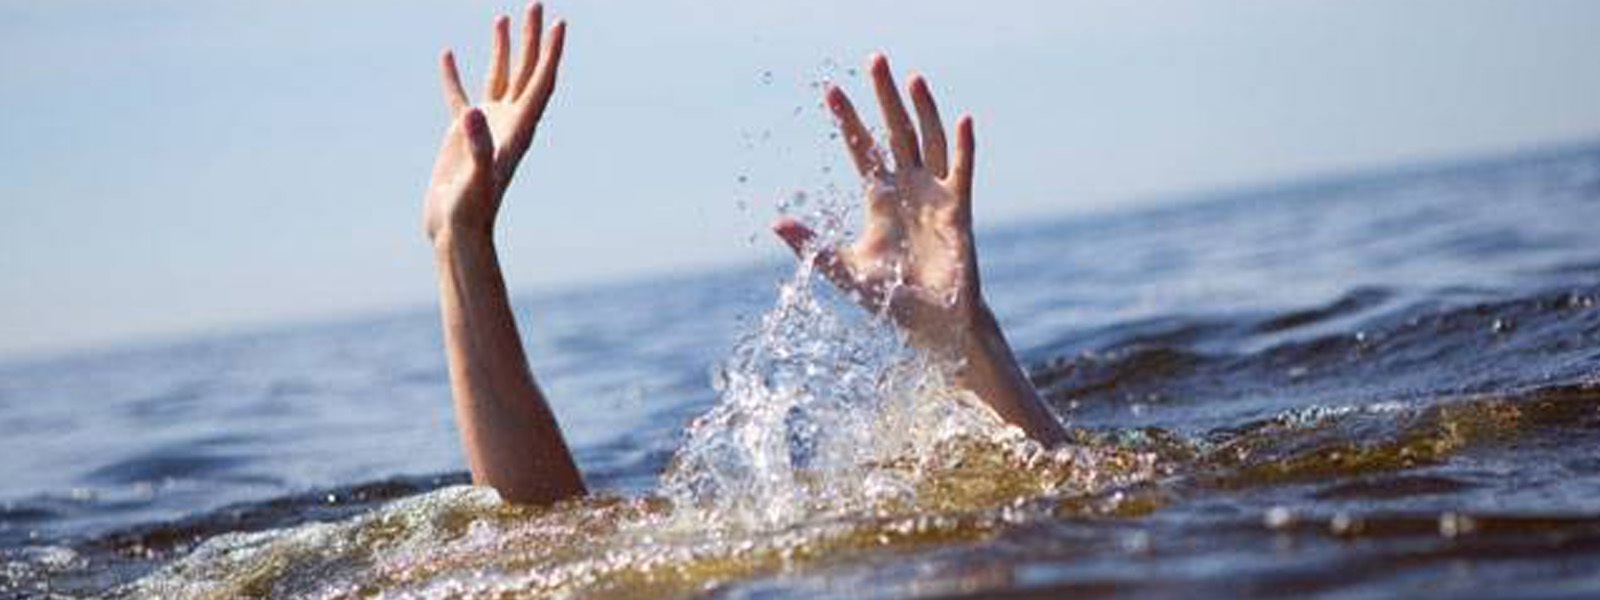 Four teachers suspended over drowning incident